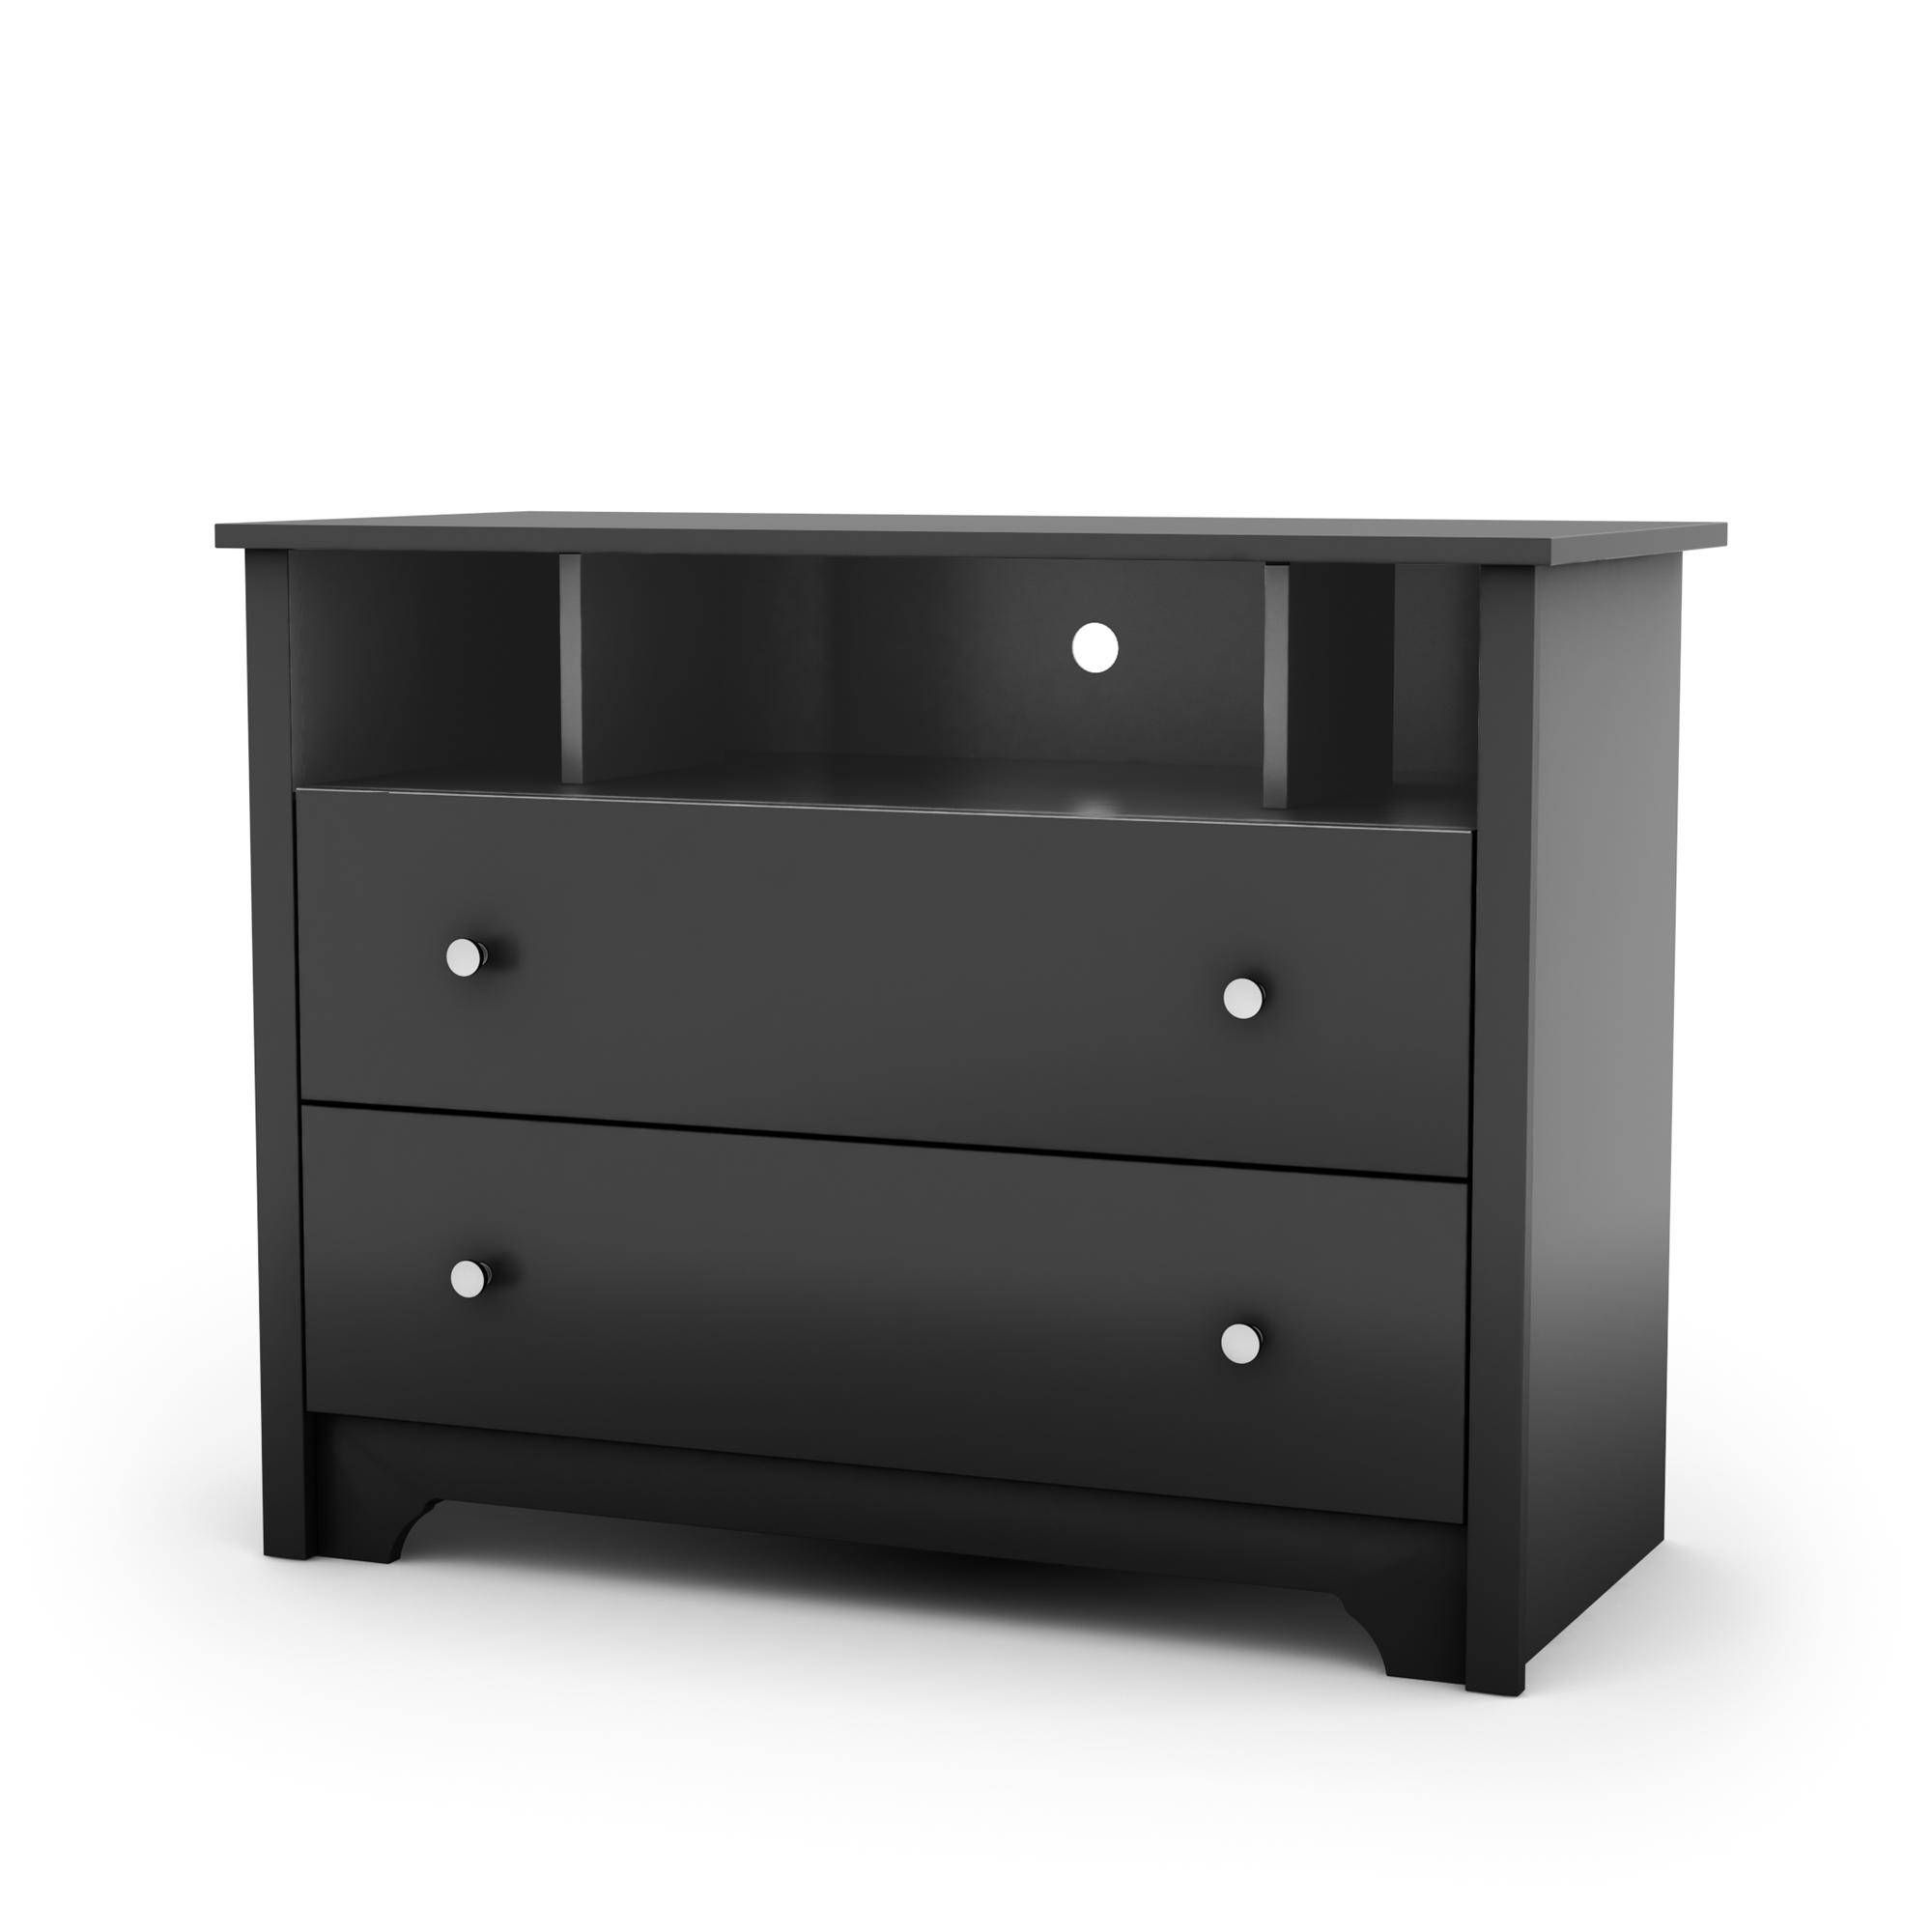 Top 15 of Black Tv Cabinets With Drawers